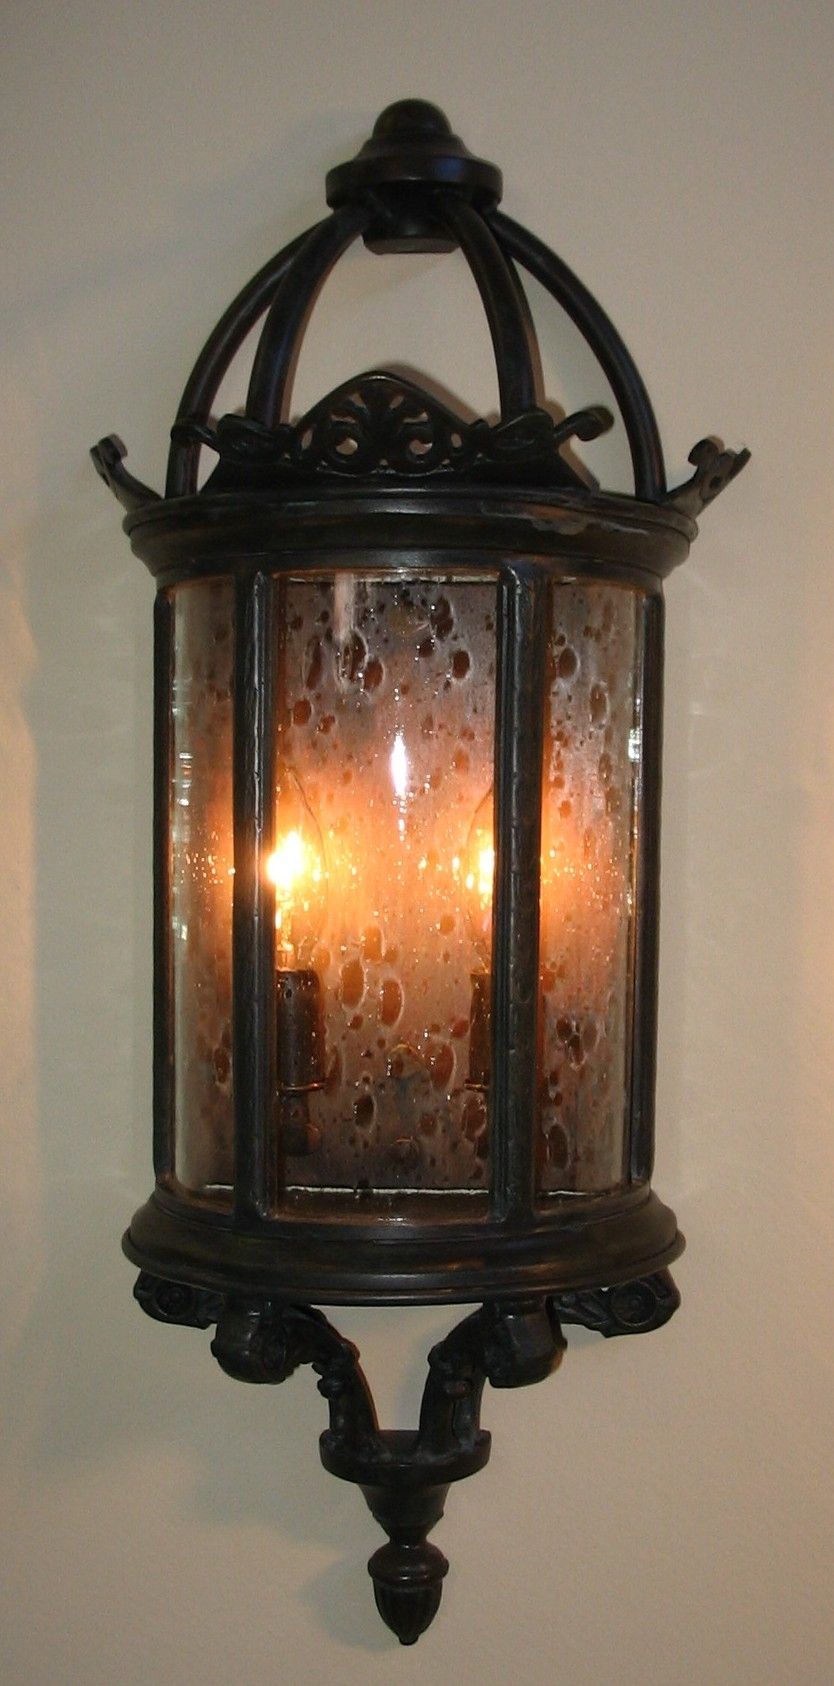 Home Decor: Gothic Outdoor Lighting Fixtures For Wall Lights Ideas Throughout Gothic Outdoor Wall Lighting (View 8 of 15)